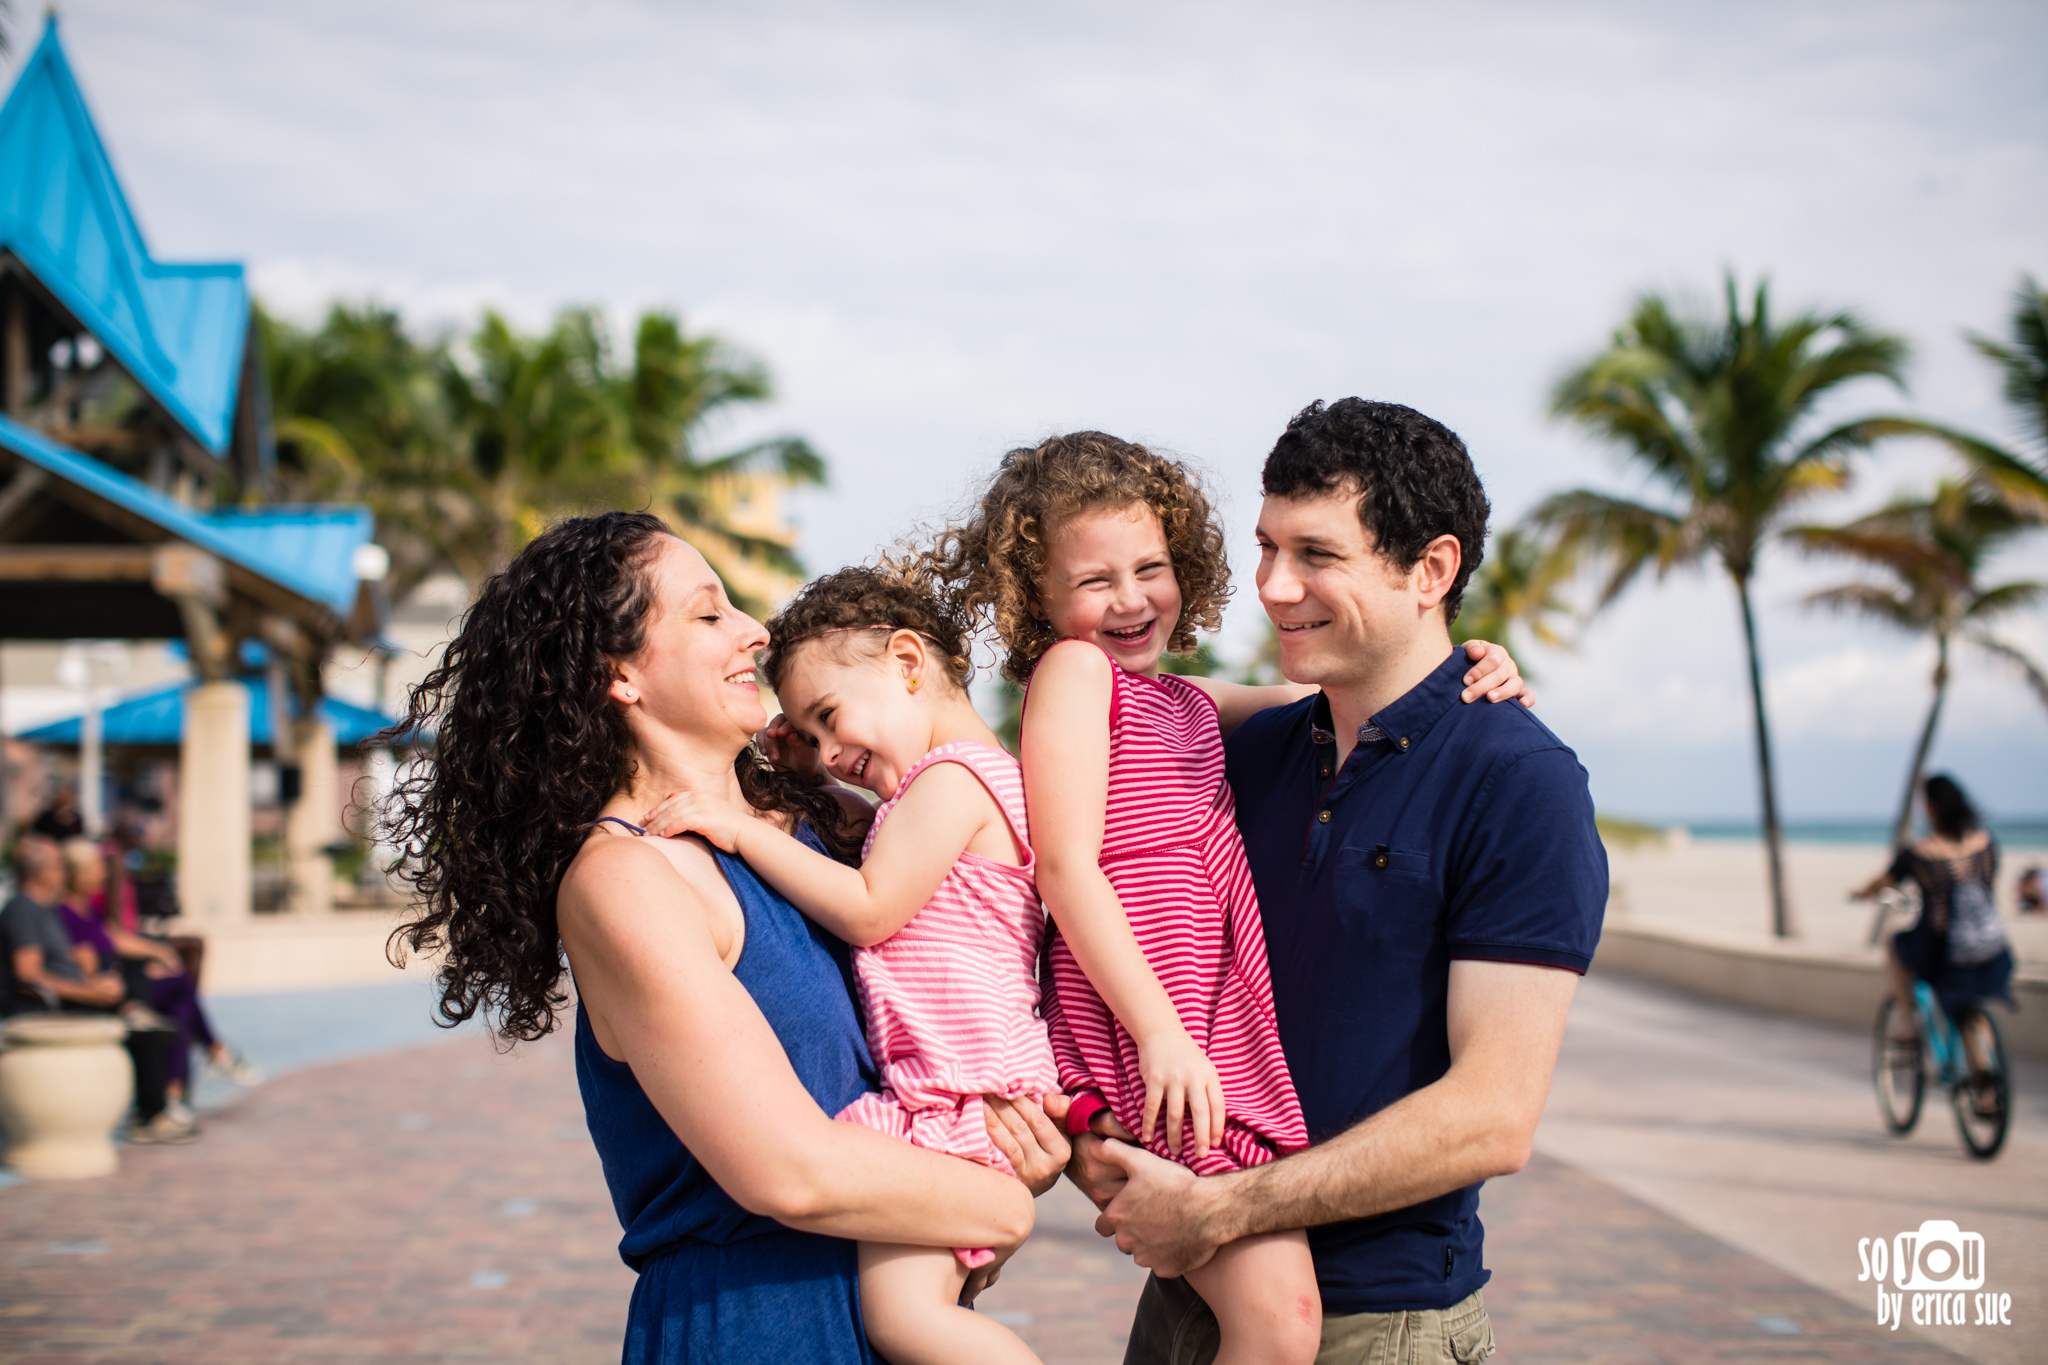 so-you-by-erica-sue-hollywood-beach-lifestyle-family-photographer-session-1559.JPG